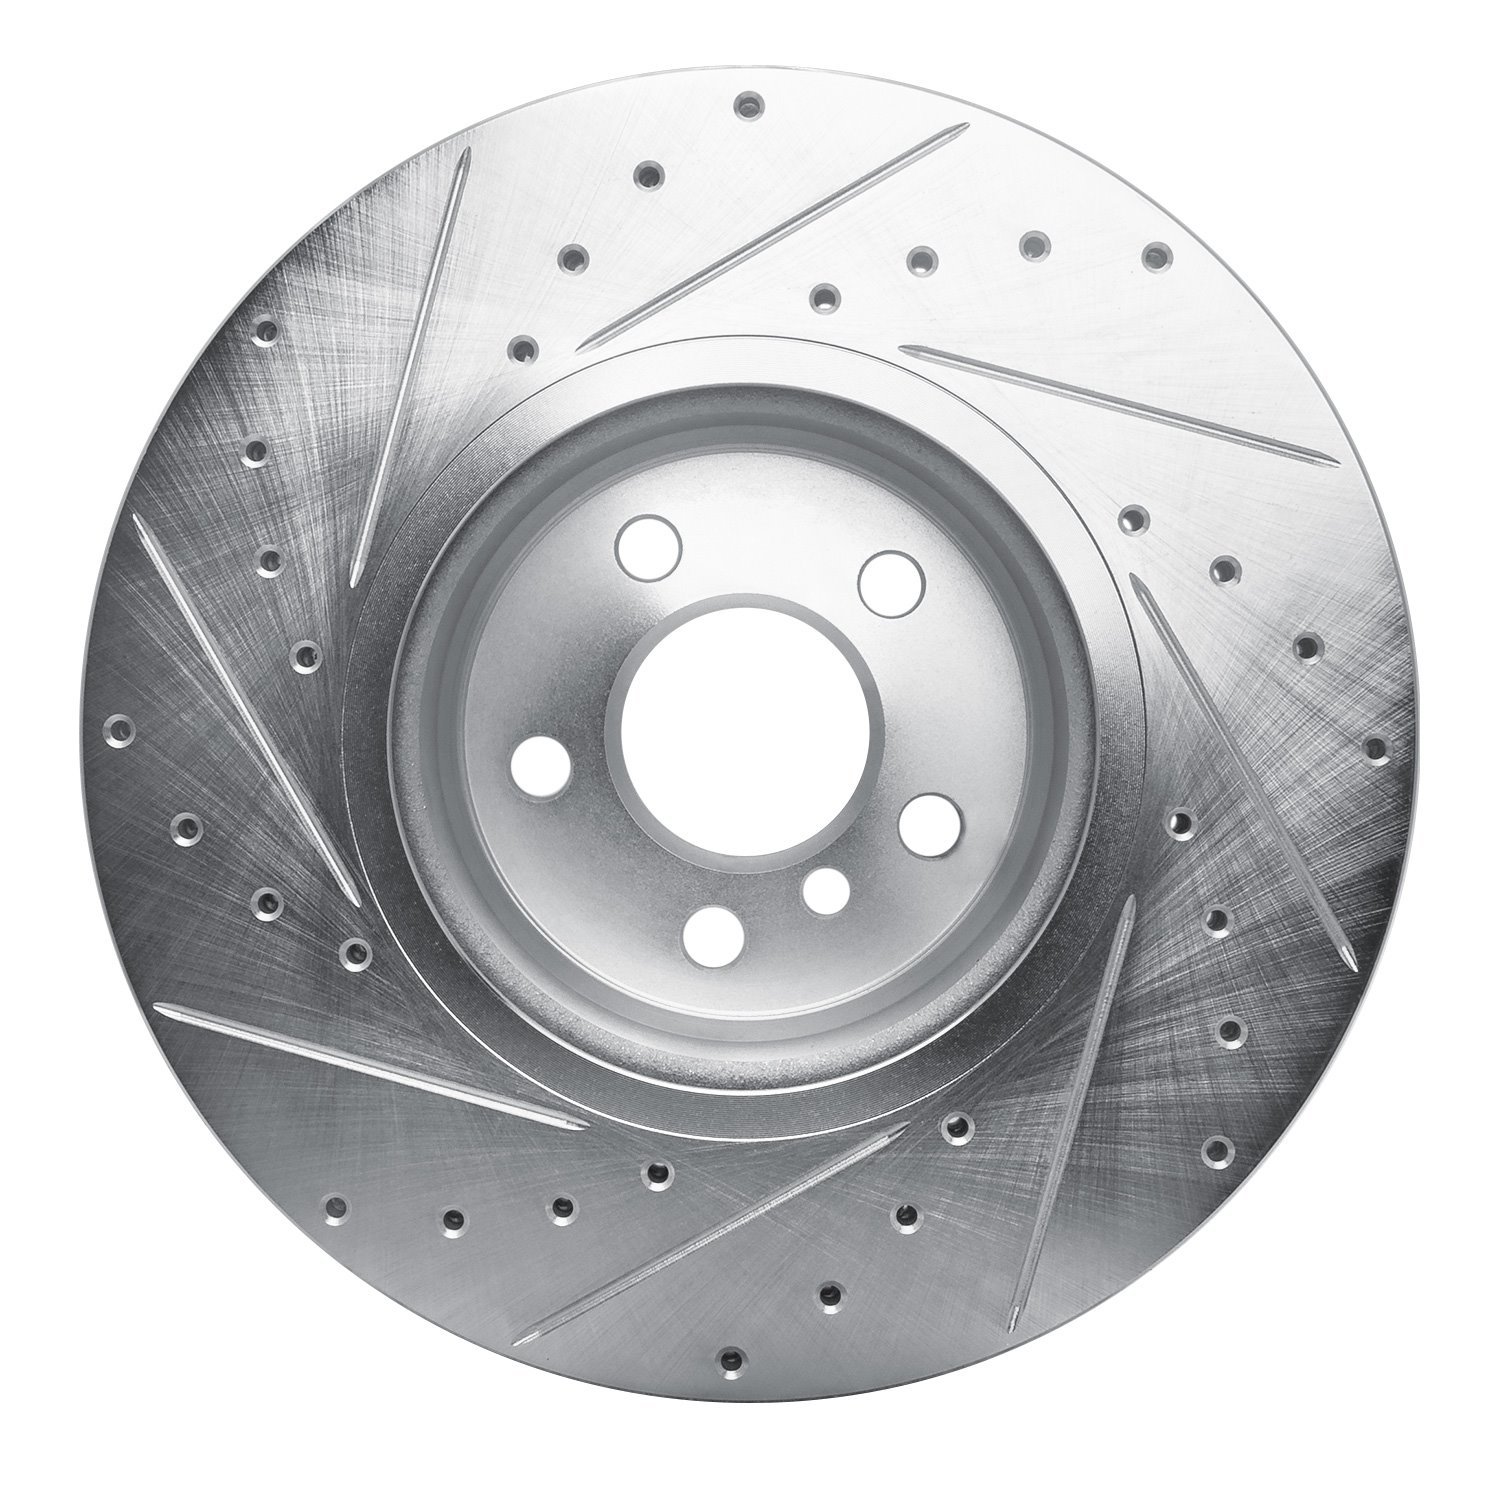 E-Line Drilled & Slotted Silver Brake Rotor, Fits Select Fits Multiple Makes/Models, Position: Front Right